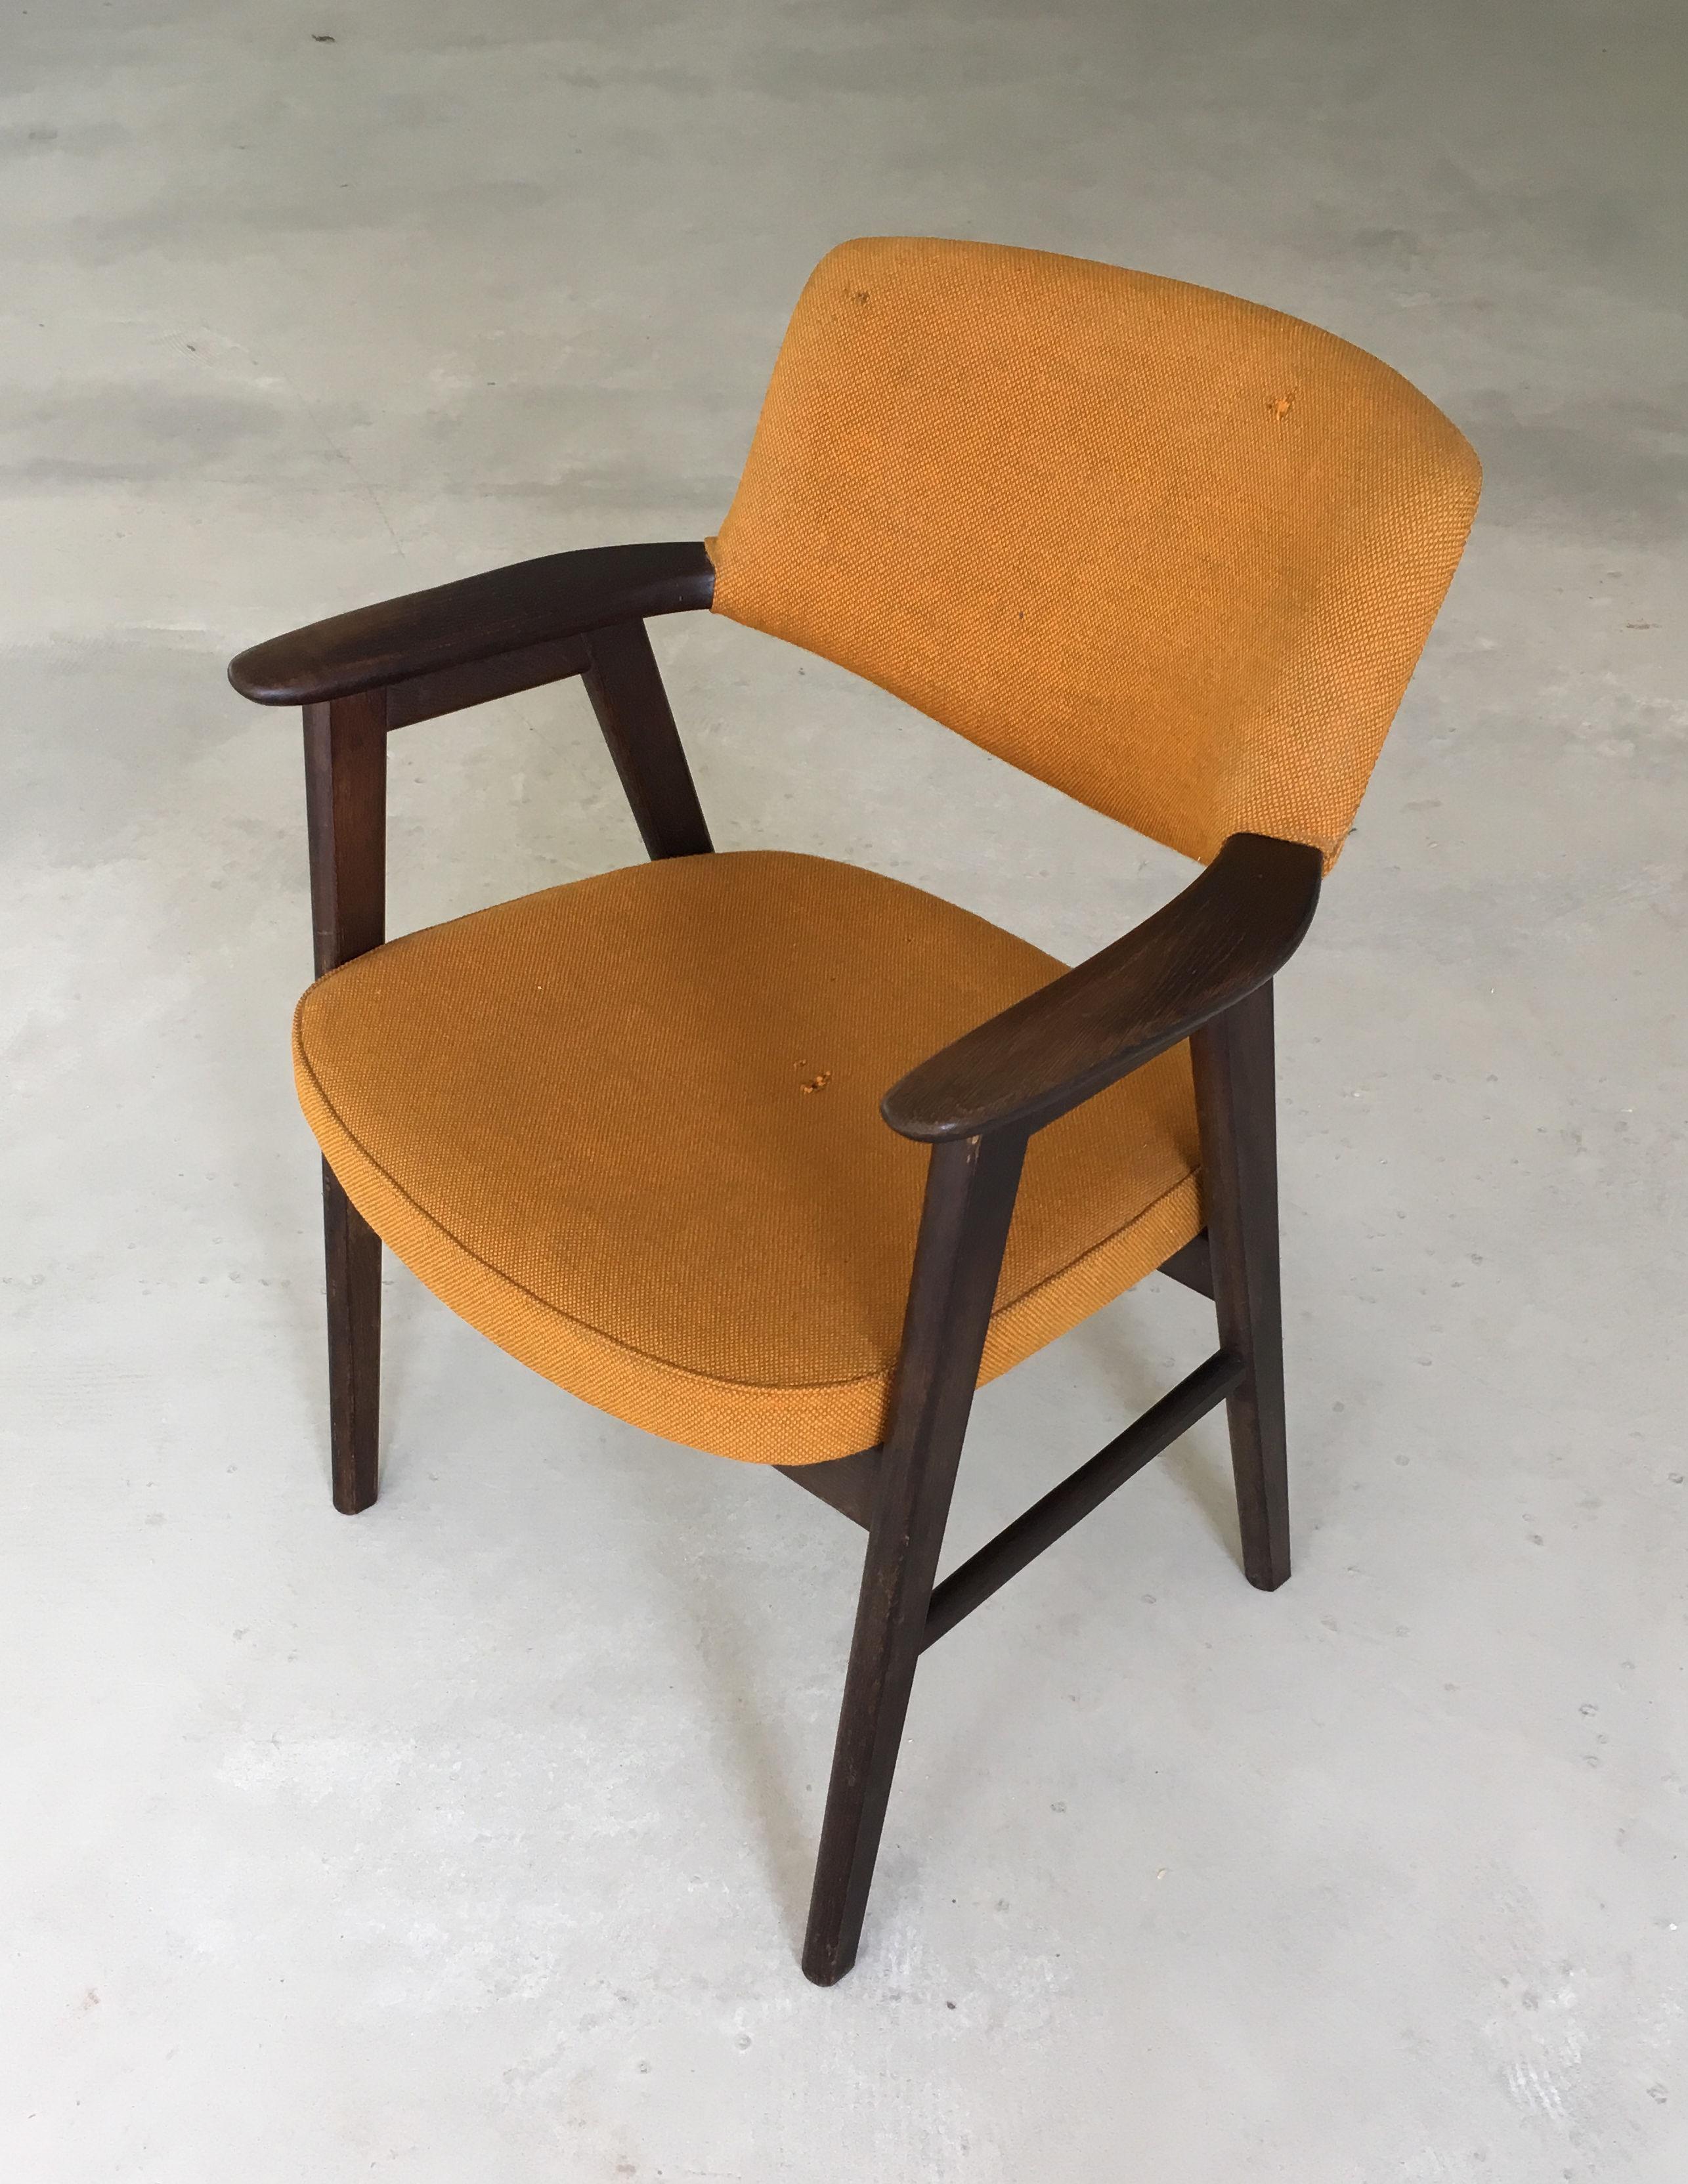 Erik Kirkegaard Danish Desk Chair in Tanned Oak designed for Høng Stolefabrik in 1956. 

The comfortable chair feature a simple minimalistic design and will do well as a desk chair.

Frames of the chairs have been checked and refinished by our